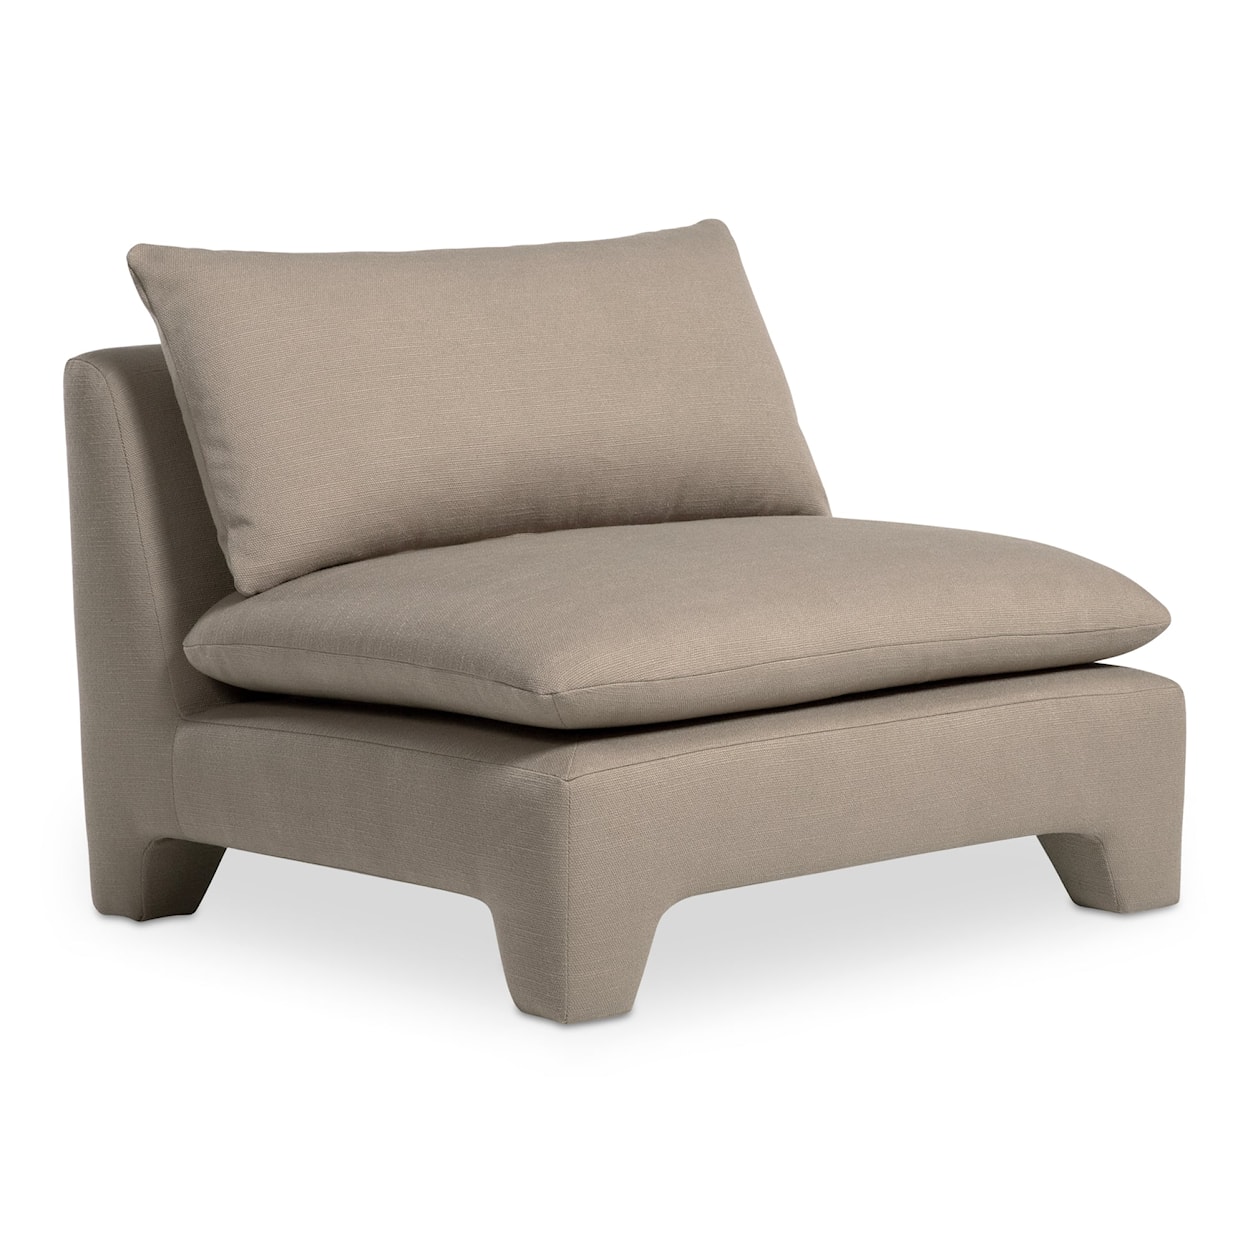 Moe's Home Collection Estelle Armless Lounge Chair